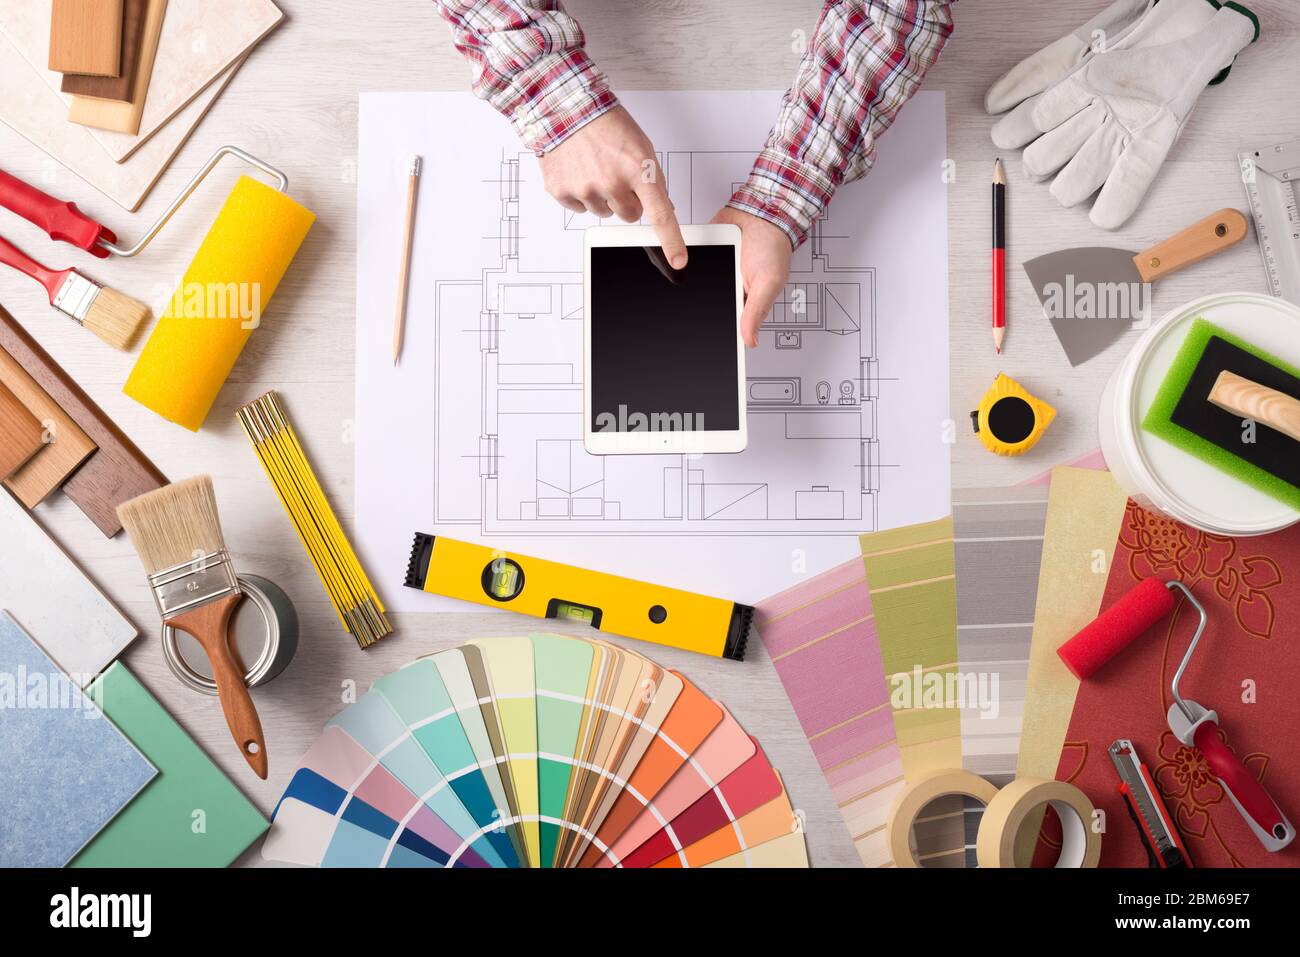 Professional decorator using a digital tablet, work tools, painting rollers and color swatches all around, top view Stock Photo